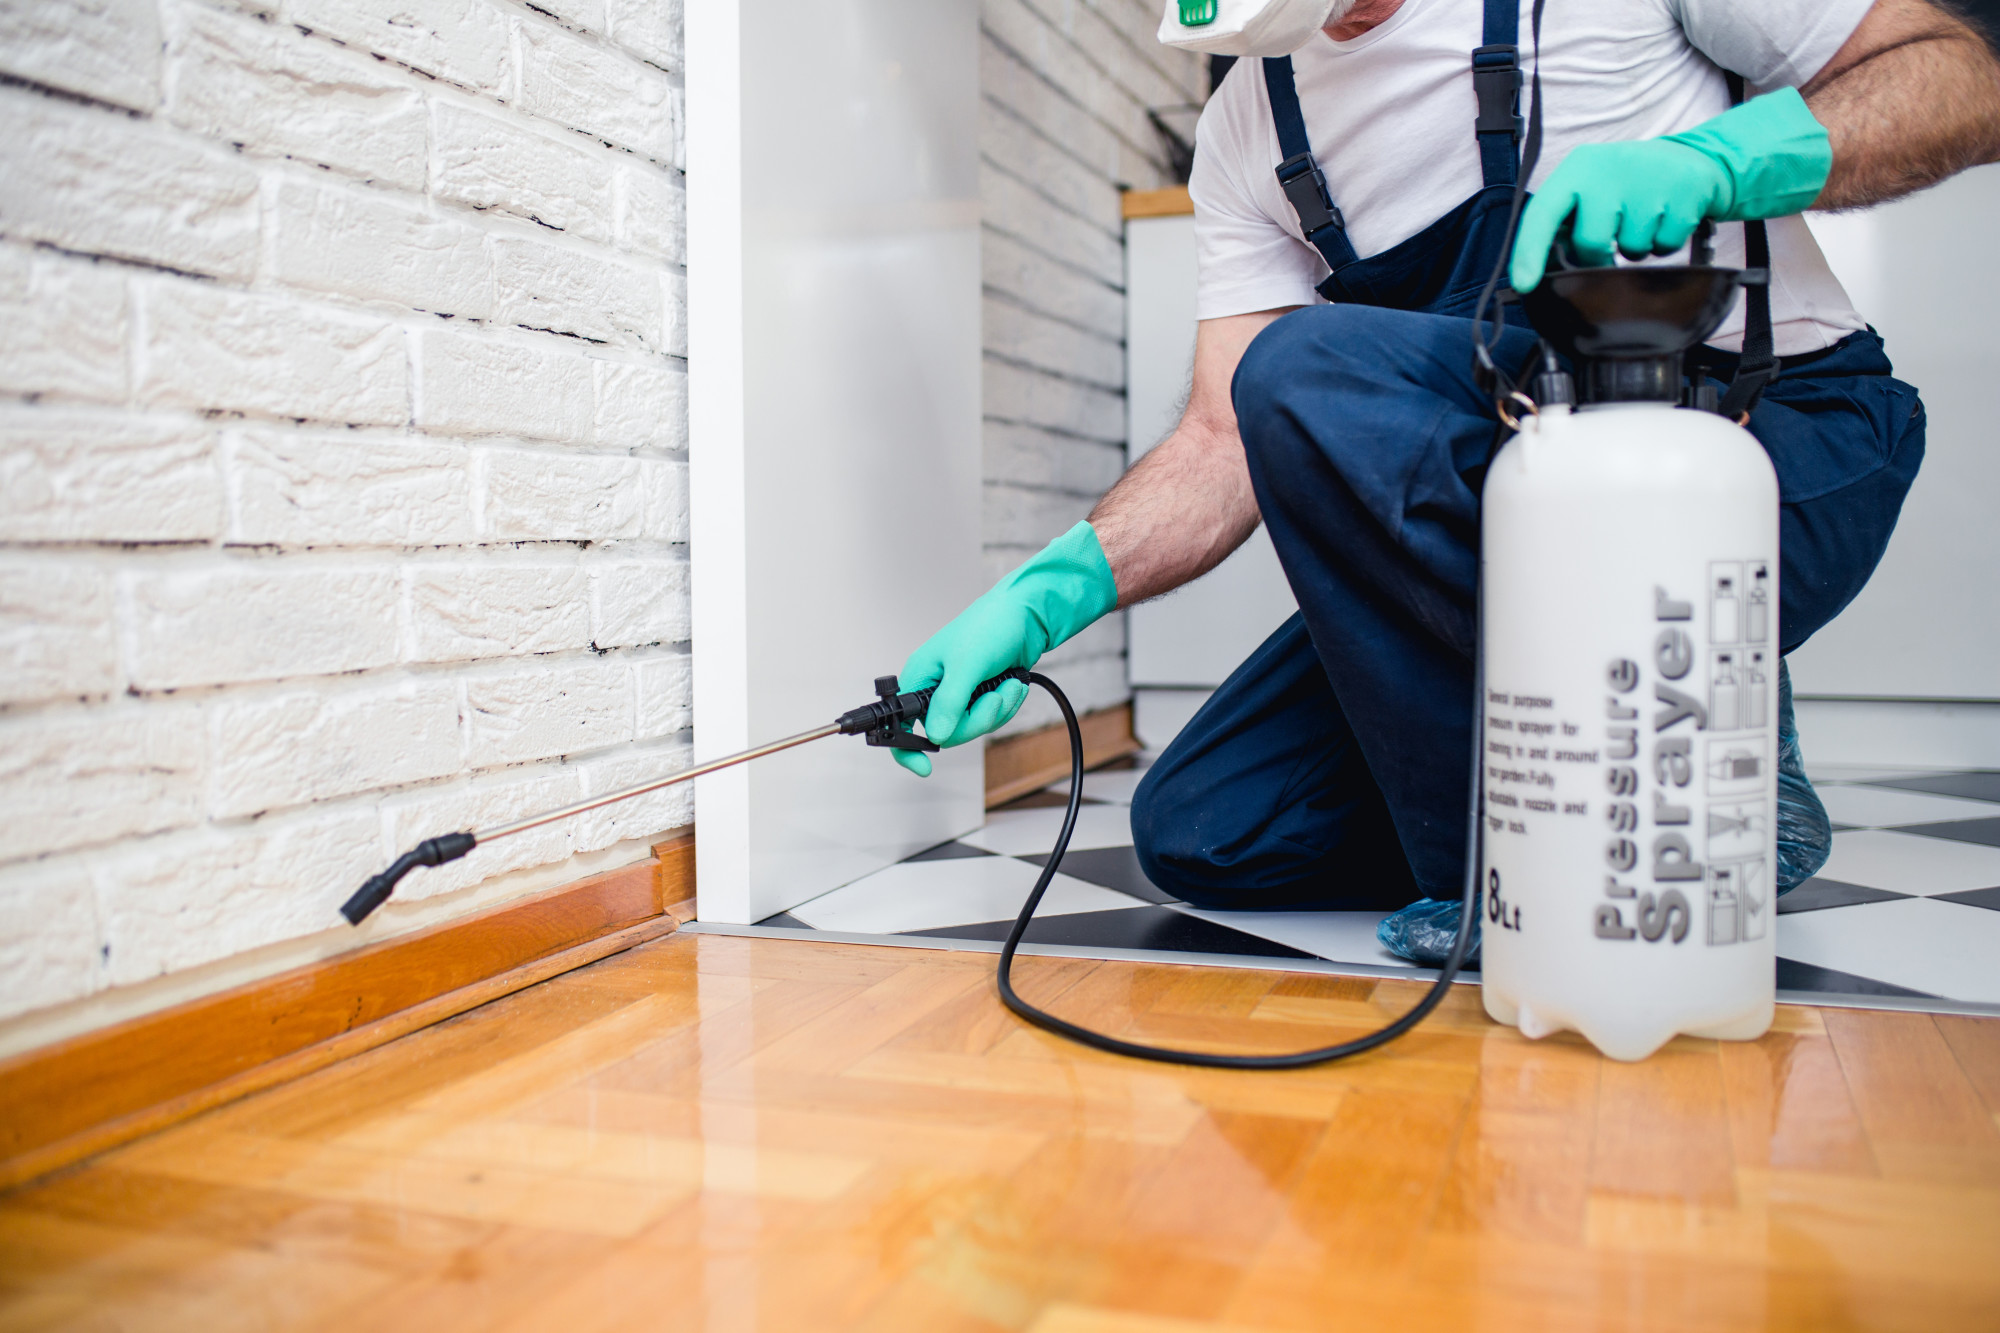 When you have uninvited pests in your home, find out why DIY pest control is better left to the experts to ensure an infestation doesn't get out of control.